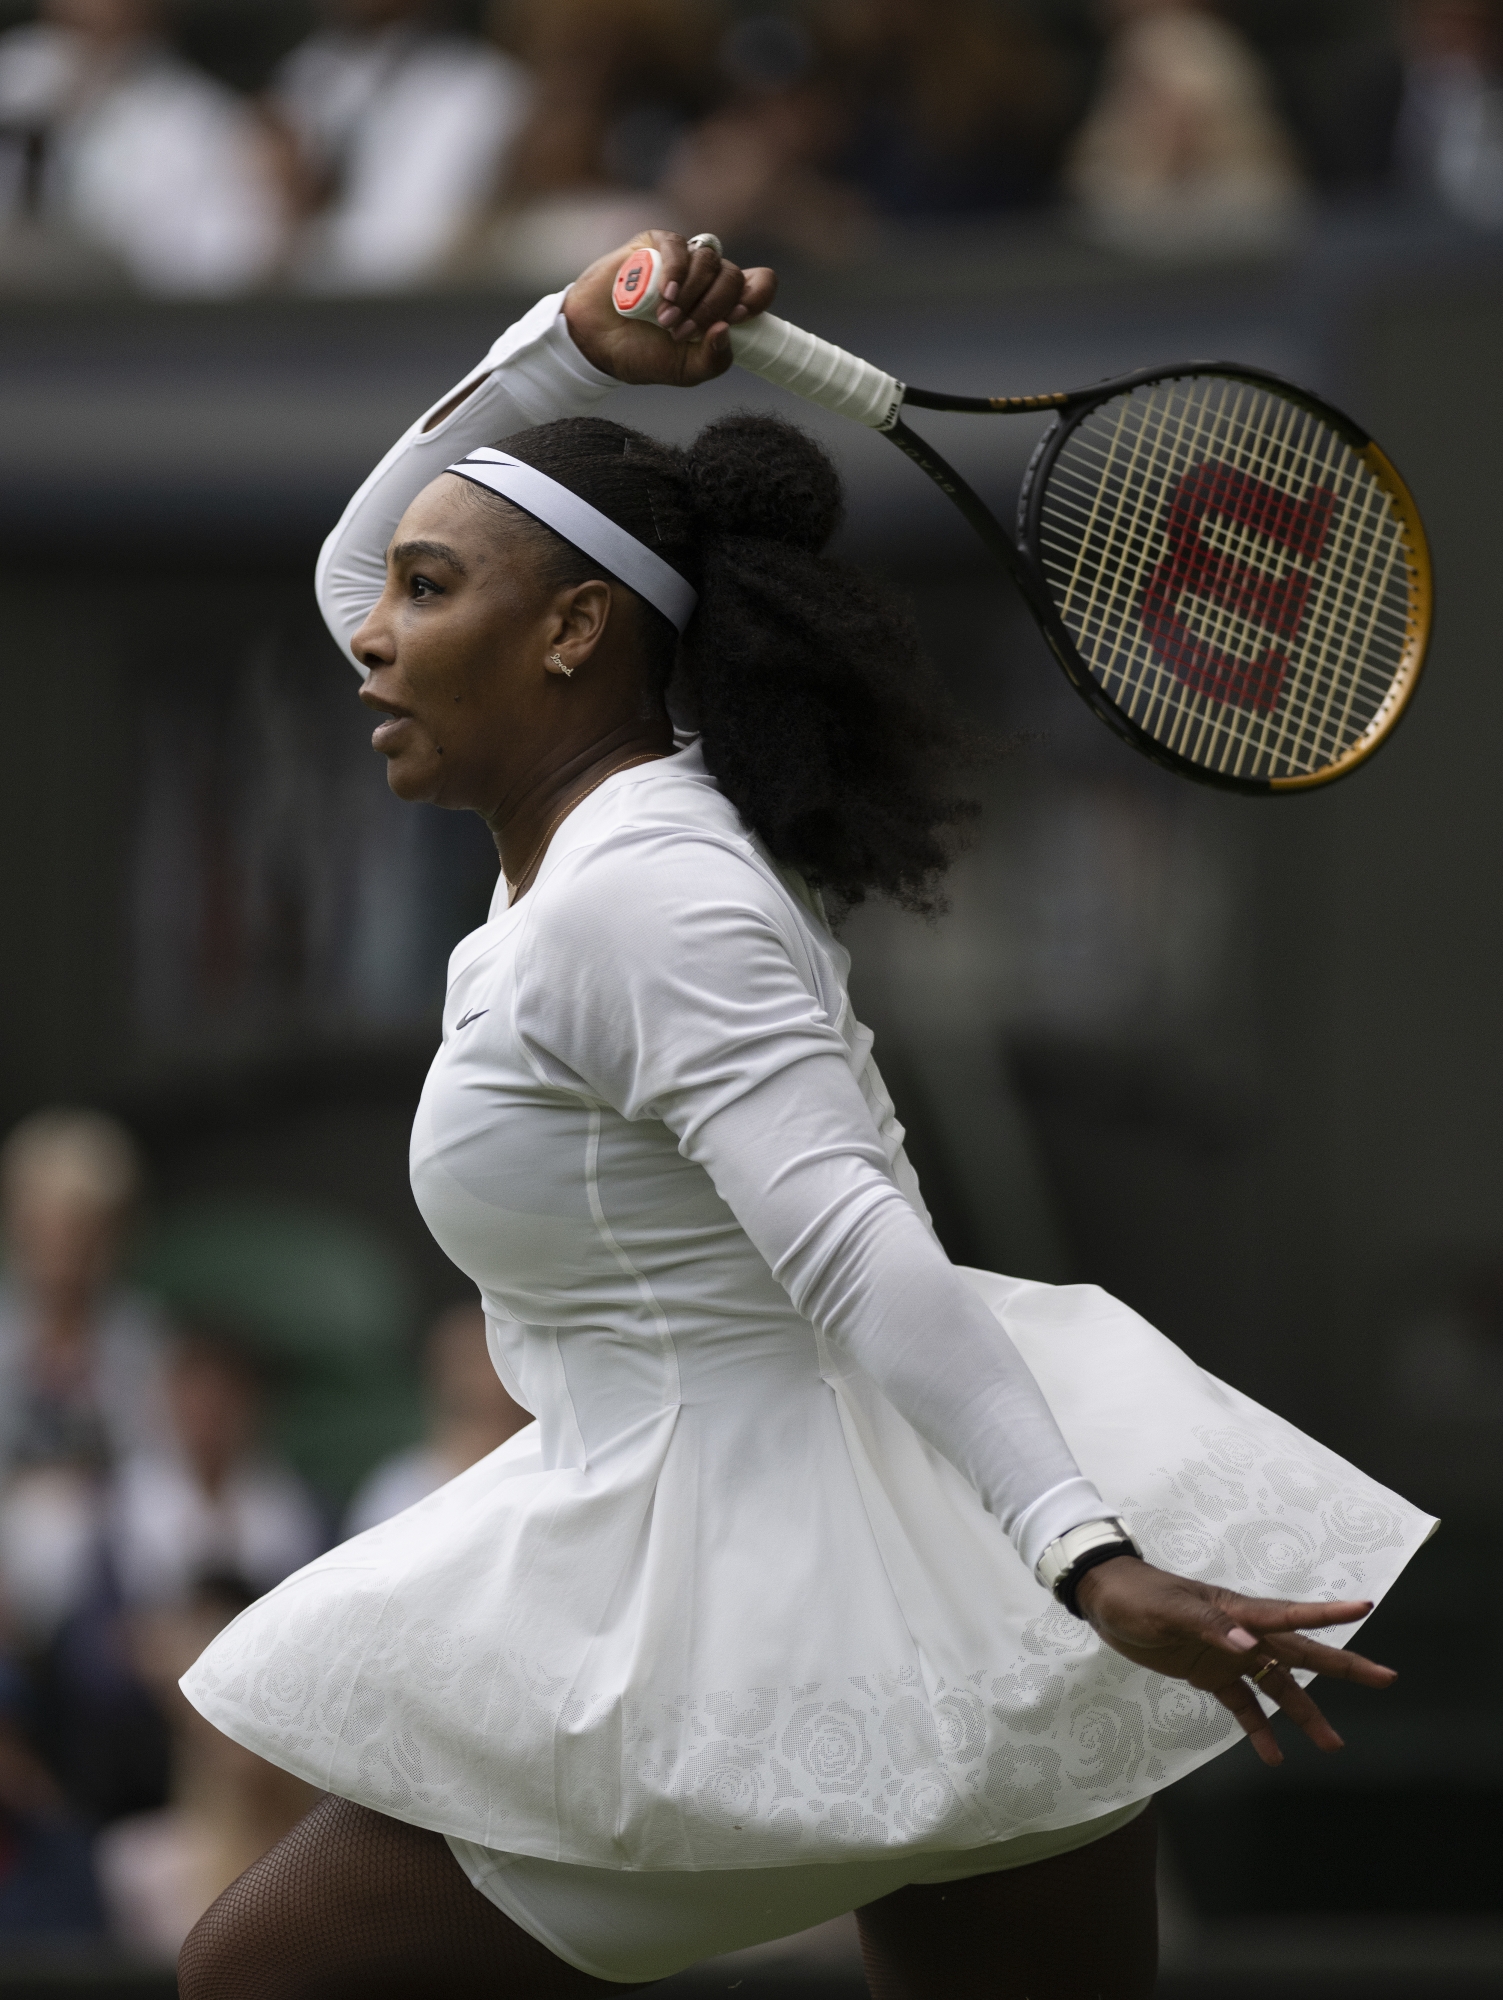 LONDON, ENGLAND - JUNE 28: Serena Williams of The United States during her match against Harmony Tan of France during their Women's Singles First Round Match on day two of The Championships Wimbledon 2022 at All England Lawn Tennis and Croquet Club on June 28, 2022 in London, England. (Photo by Visionhaus/Getty Images)